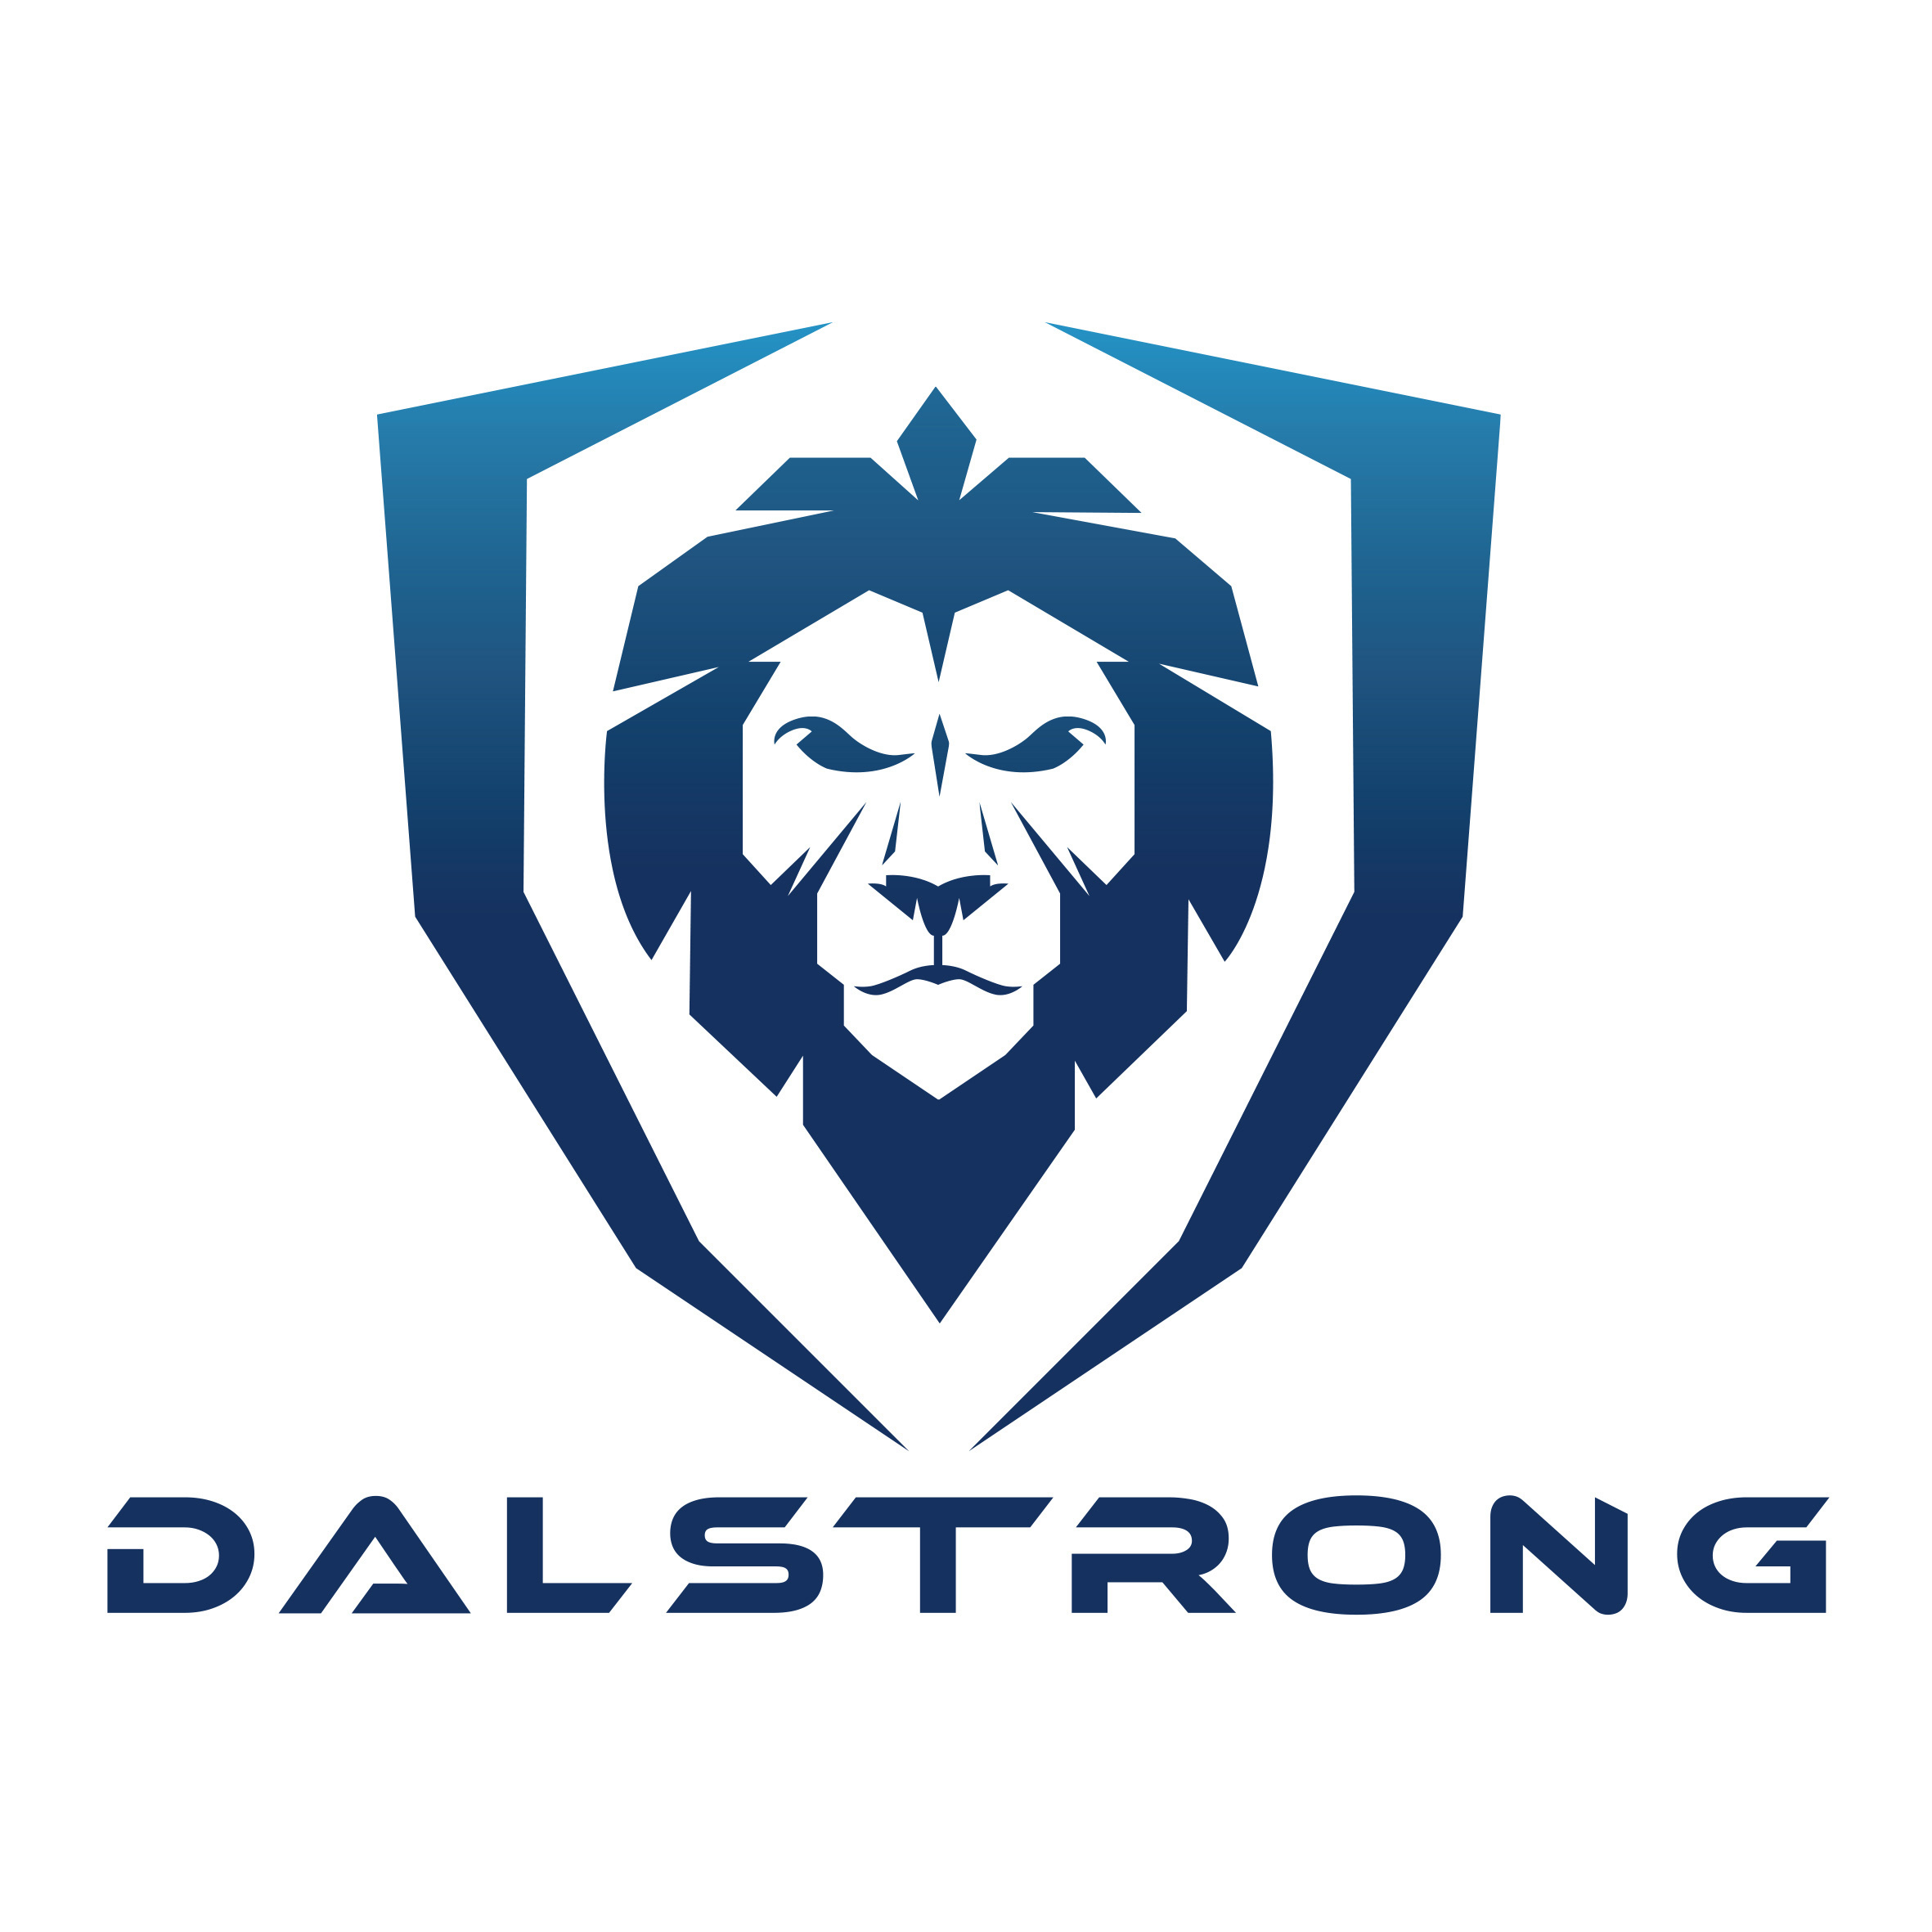 Dalstrong logo .png